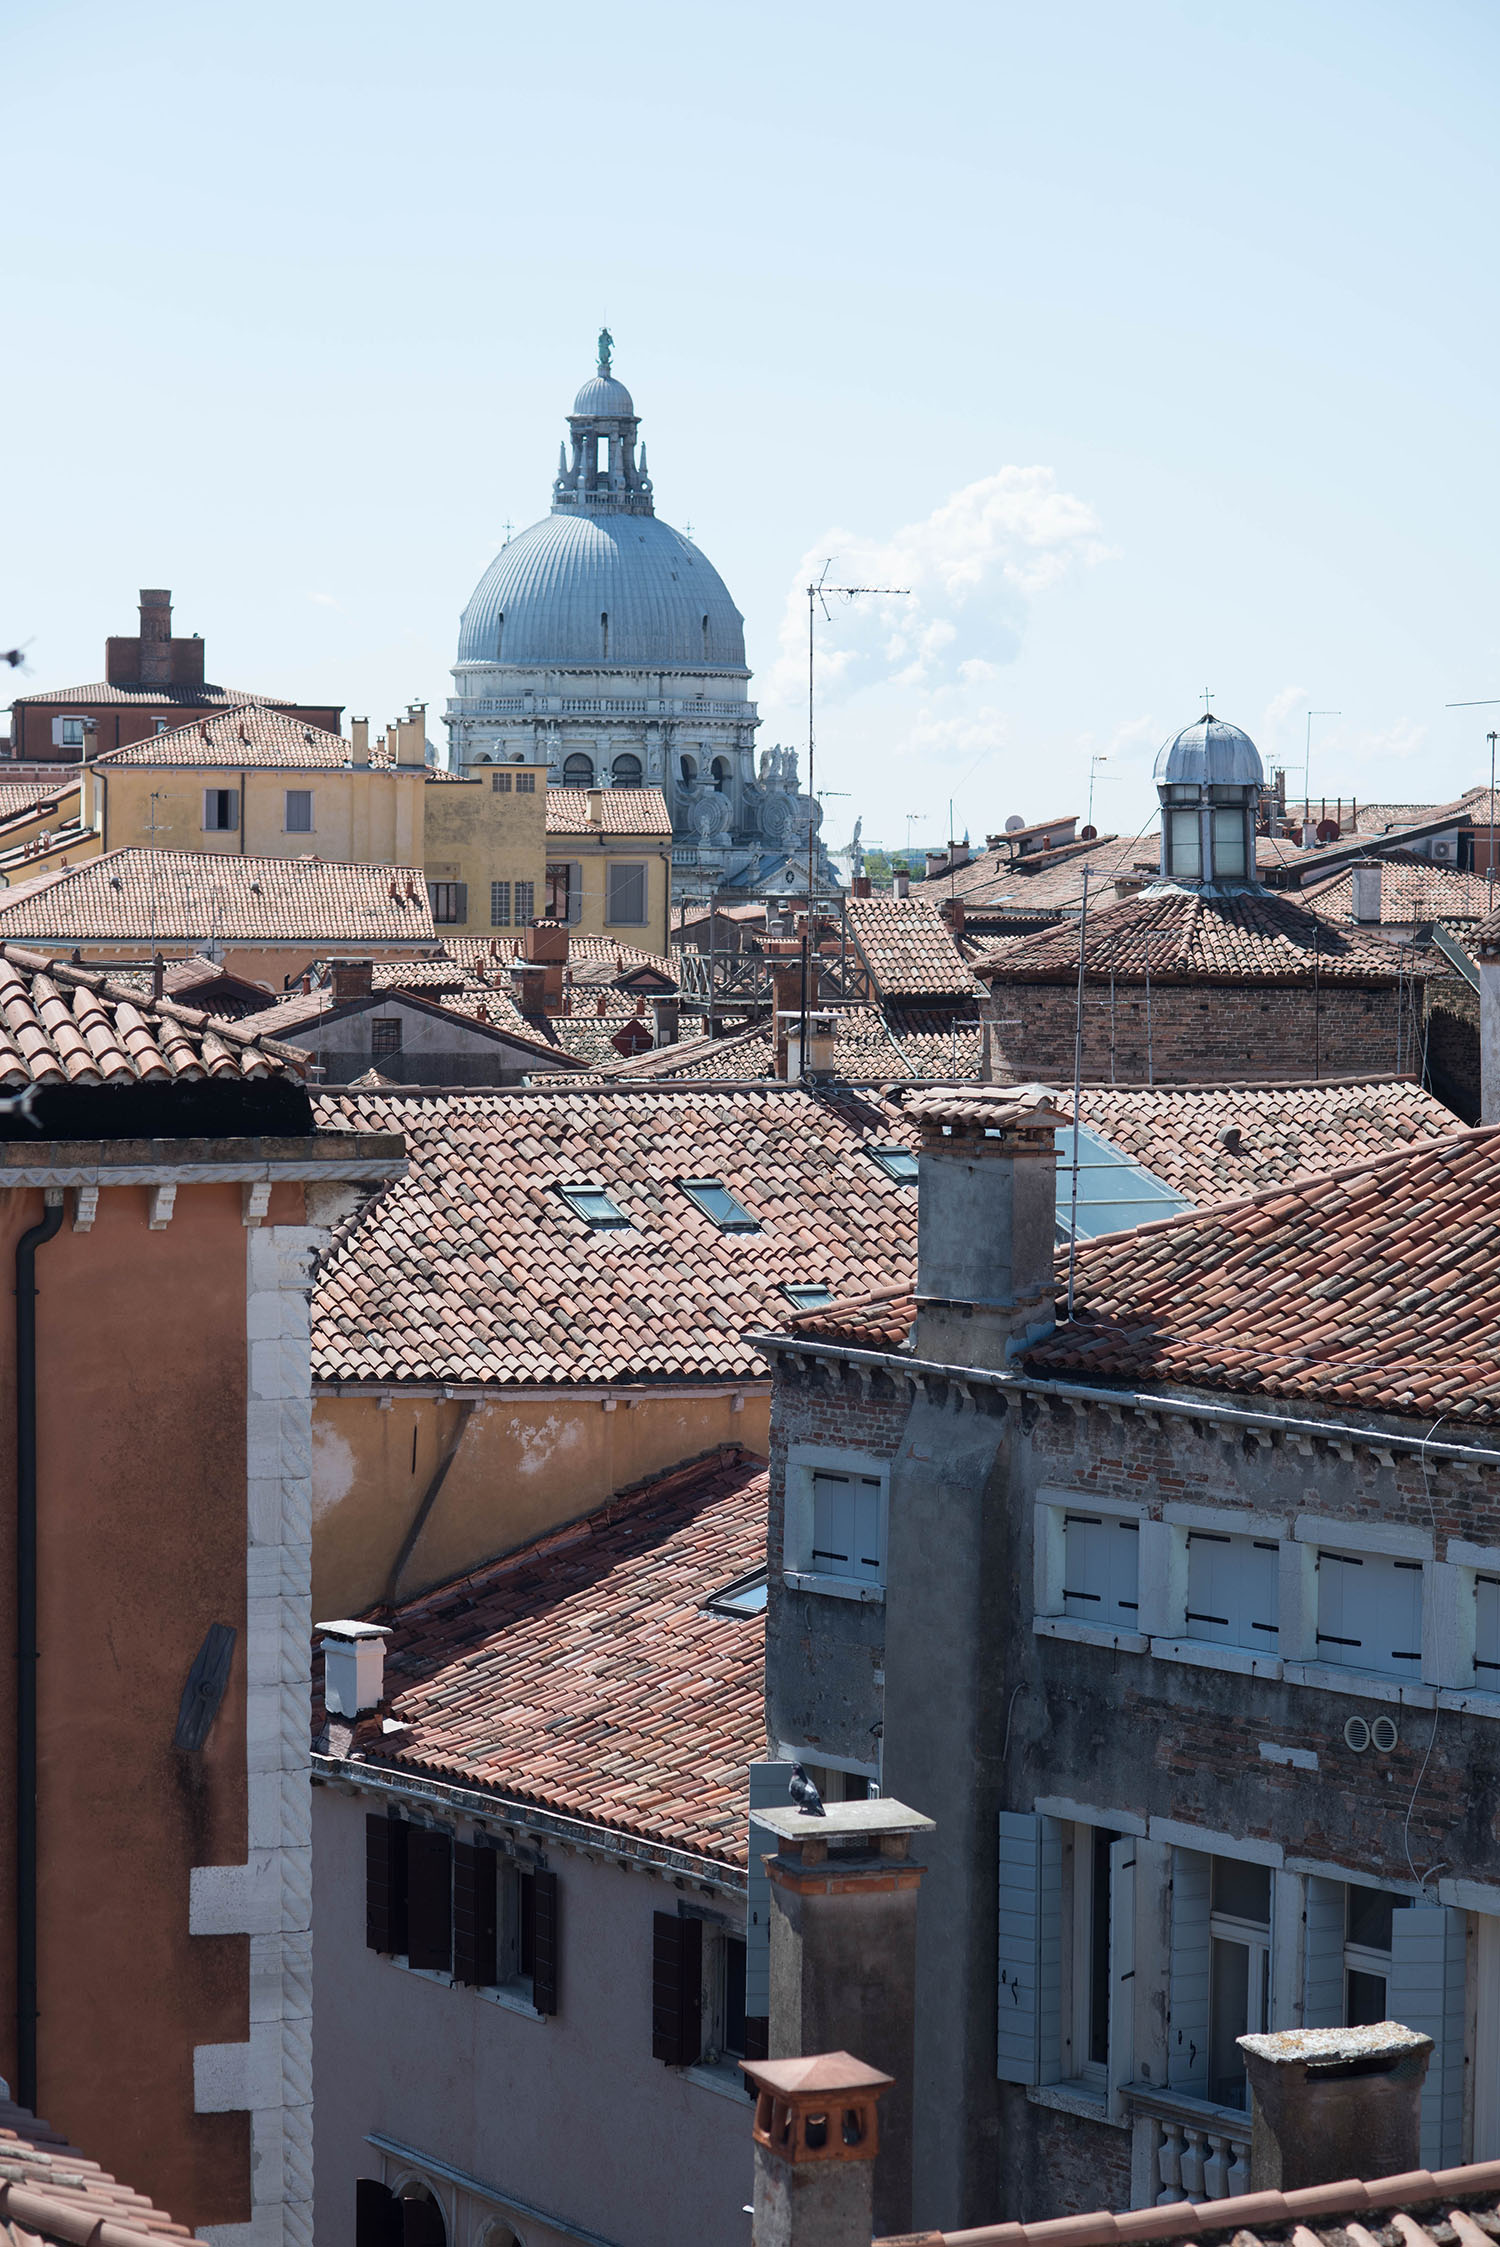 Rooftop views of Venice seen from the Scala Contarini del Bovolo, as captured by travel blogger Cee Fardoe of Coco & Vera